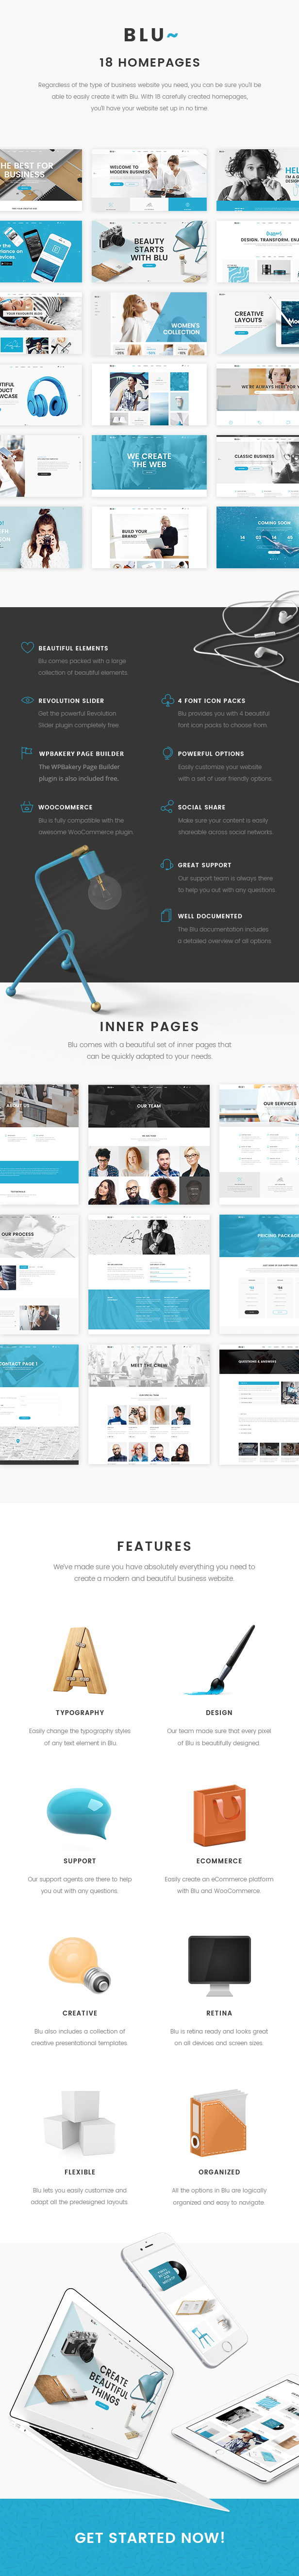 Blu - A Beautiful Business Theme for Agencies and Individuals - 1